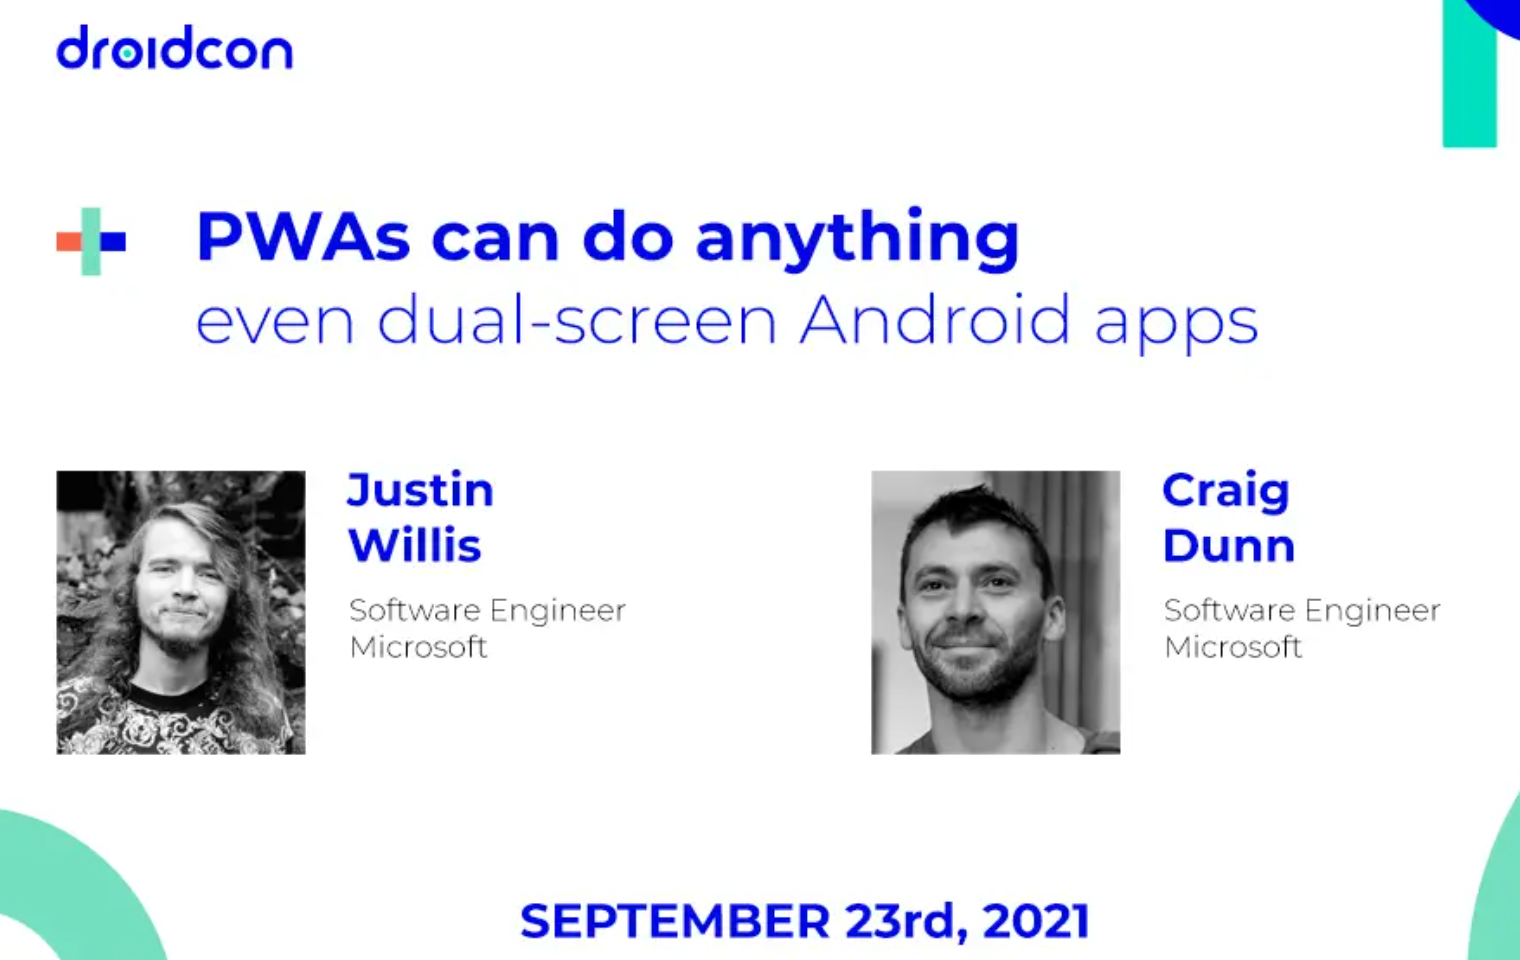 droidcon conference slide for dual-screen web apps and PWAs